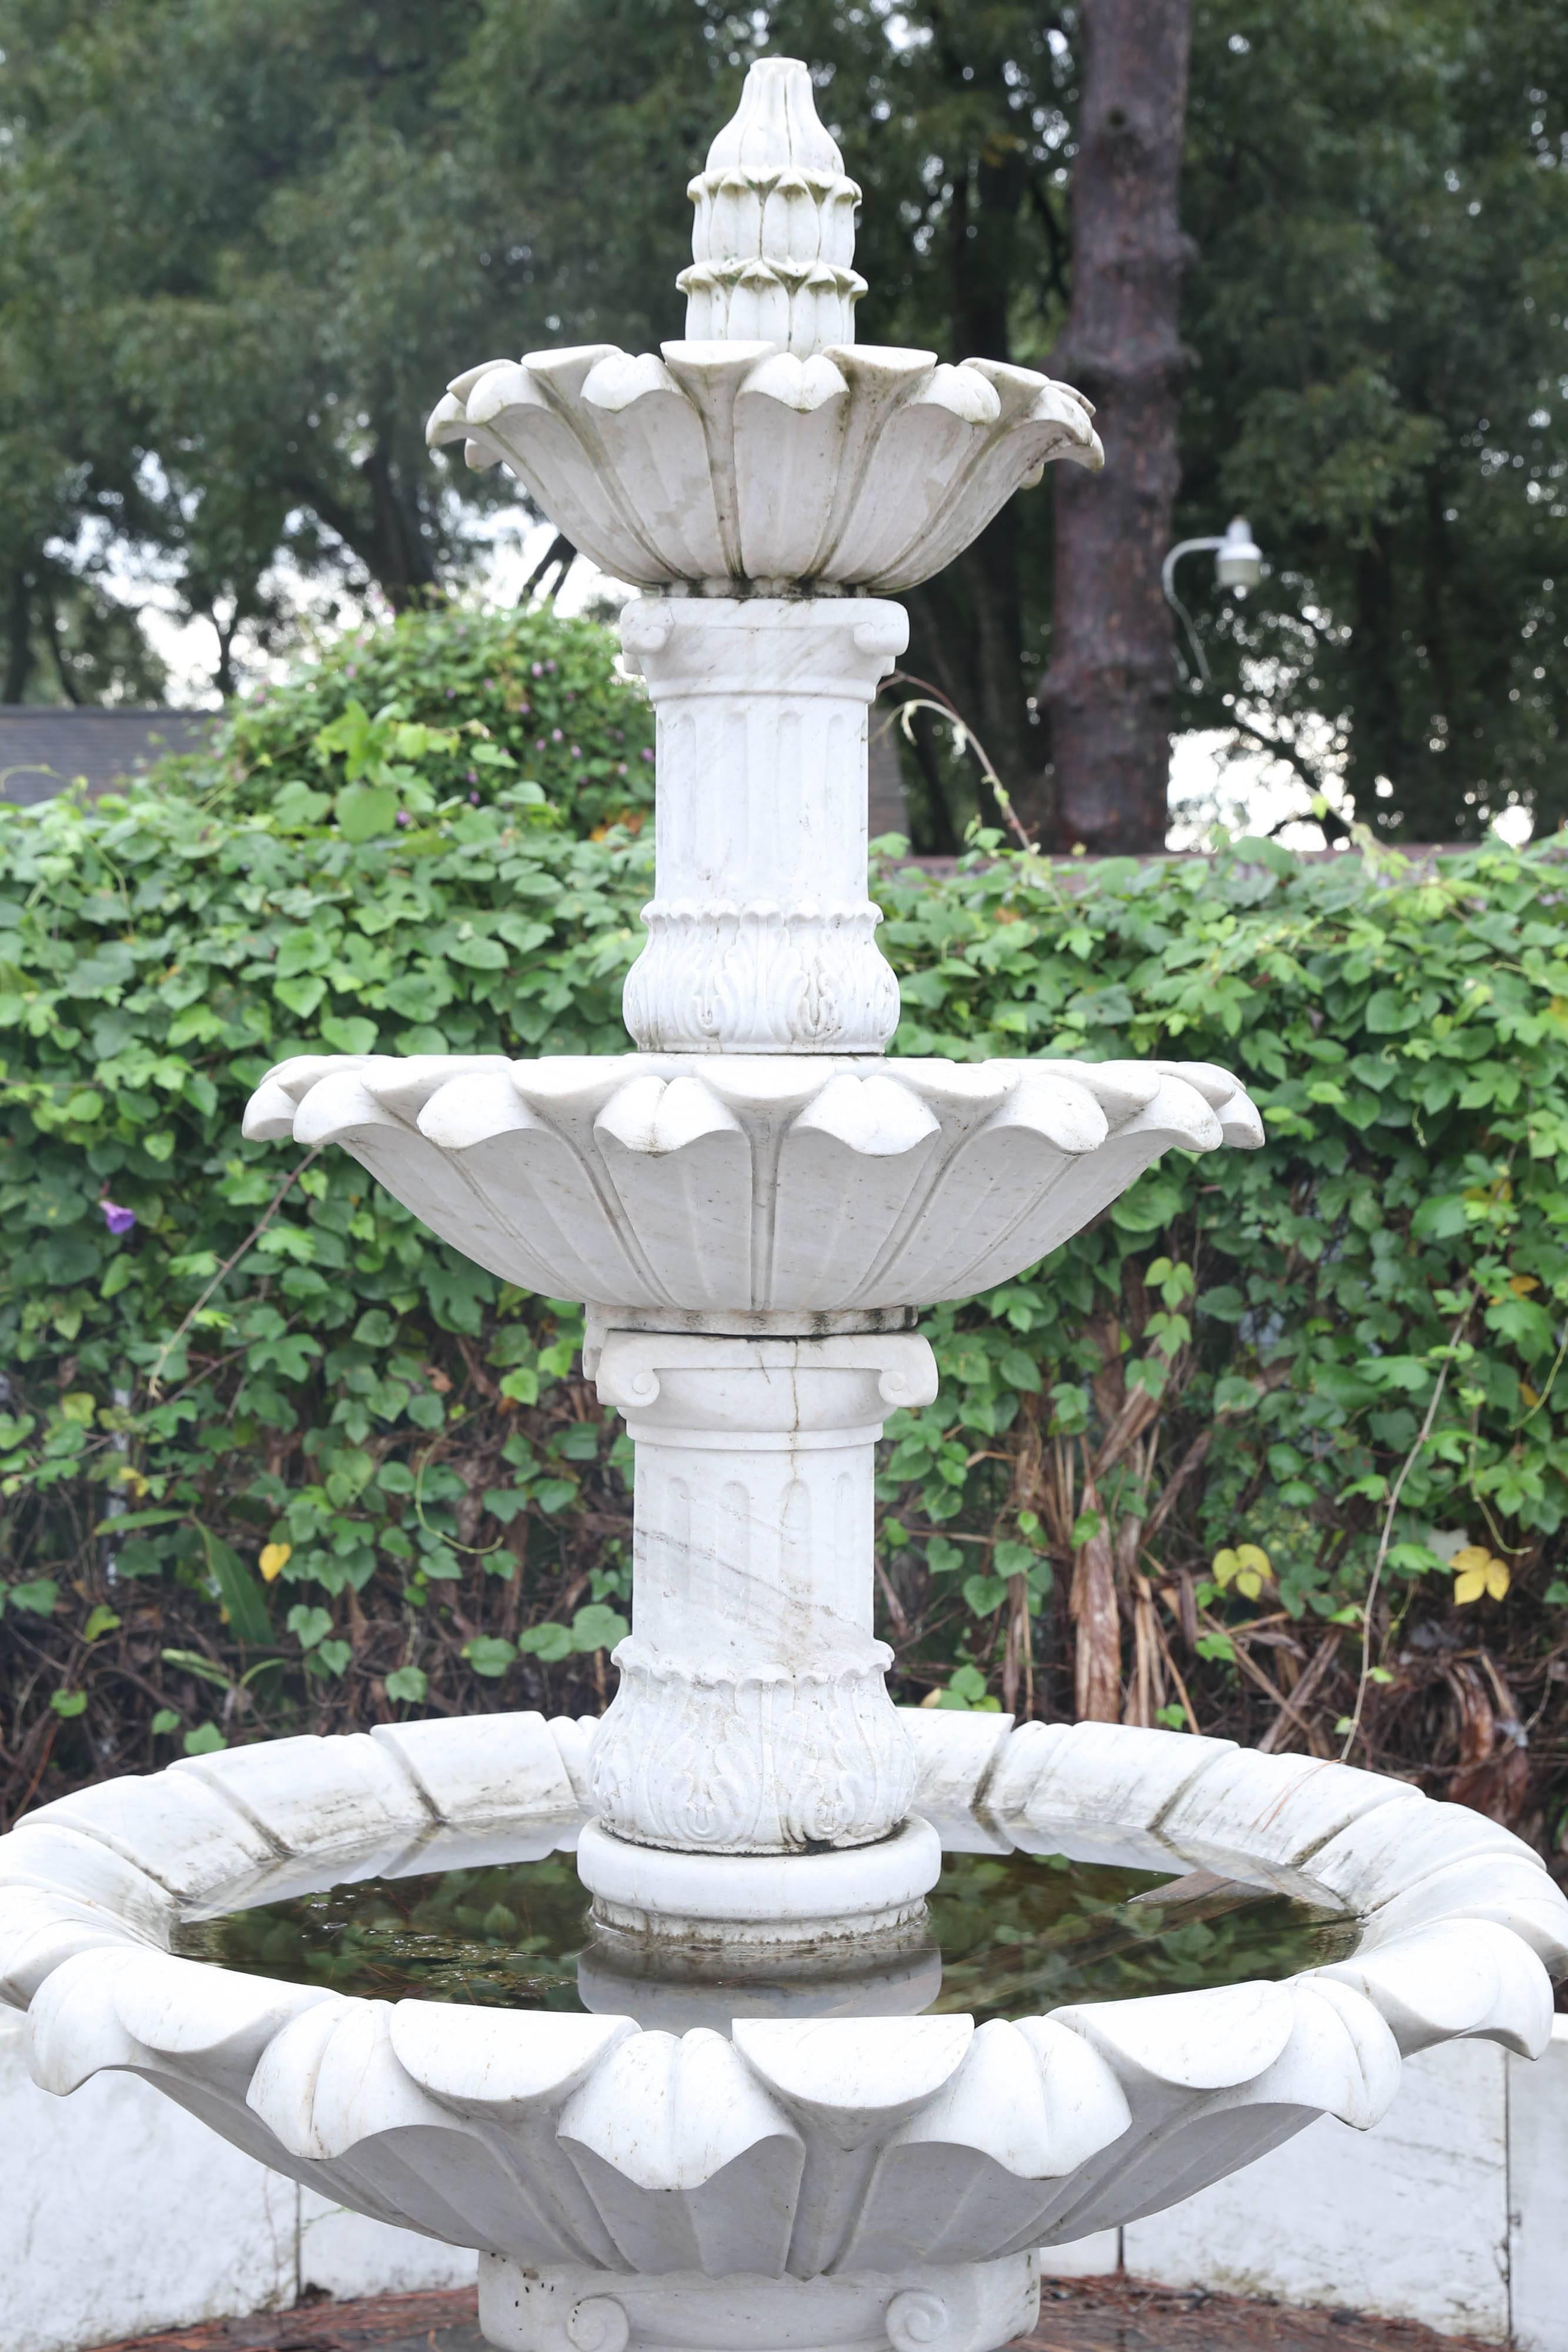 This 1950s pure white marble fountain with surround was intricately hand-carved for a park in India. Each tier is separated by a carved marble circular stem. The surround is made of marble balustrades and large scalloped shells.